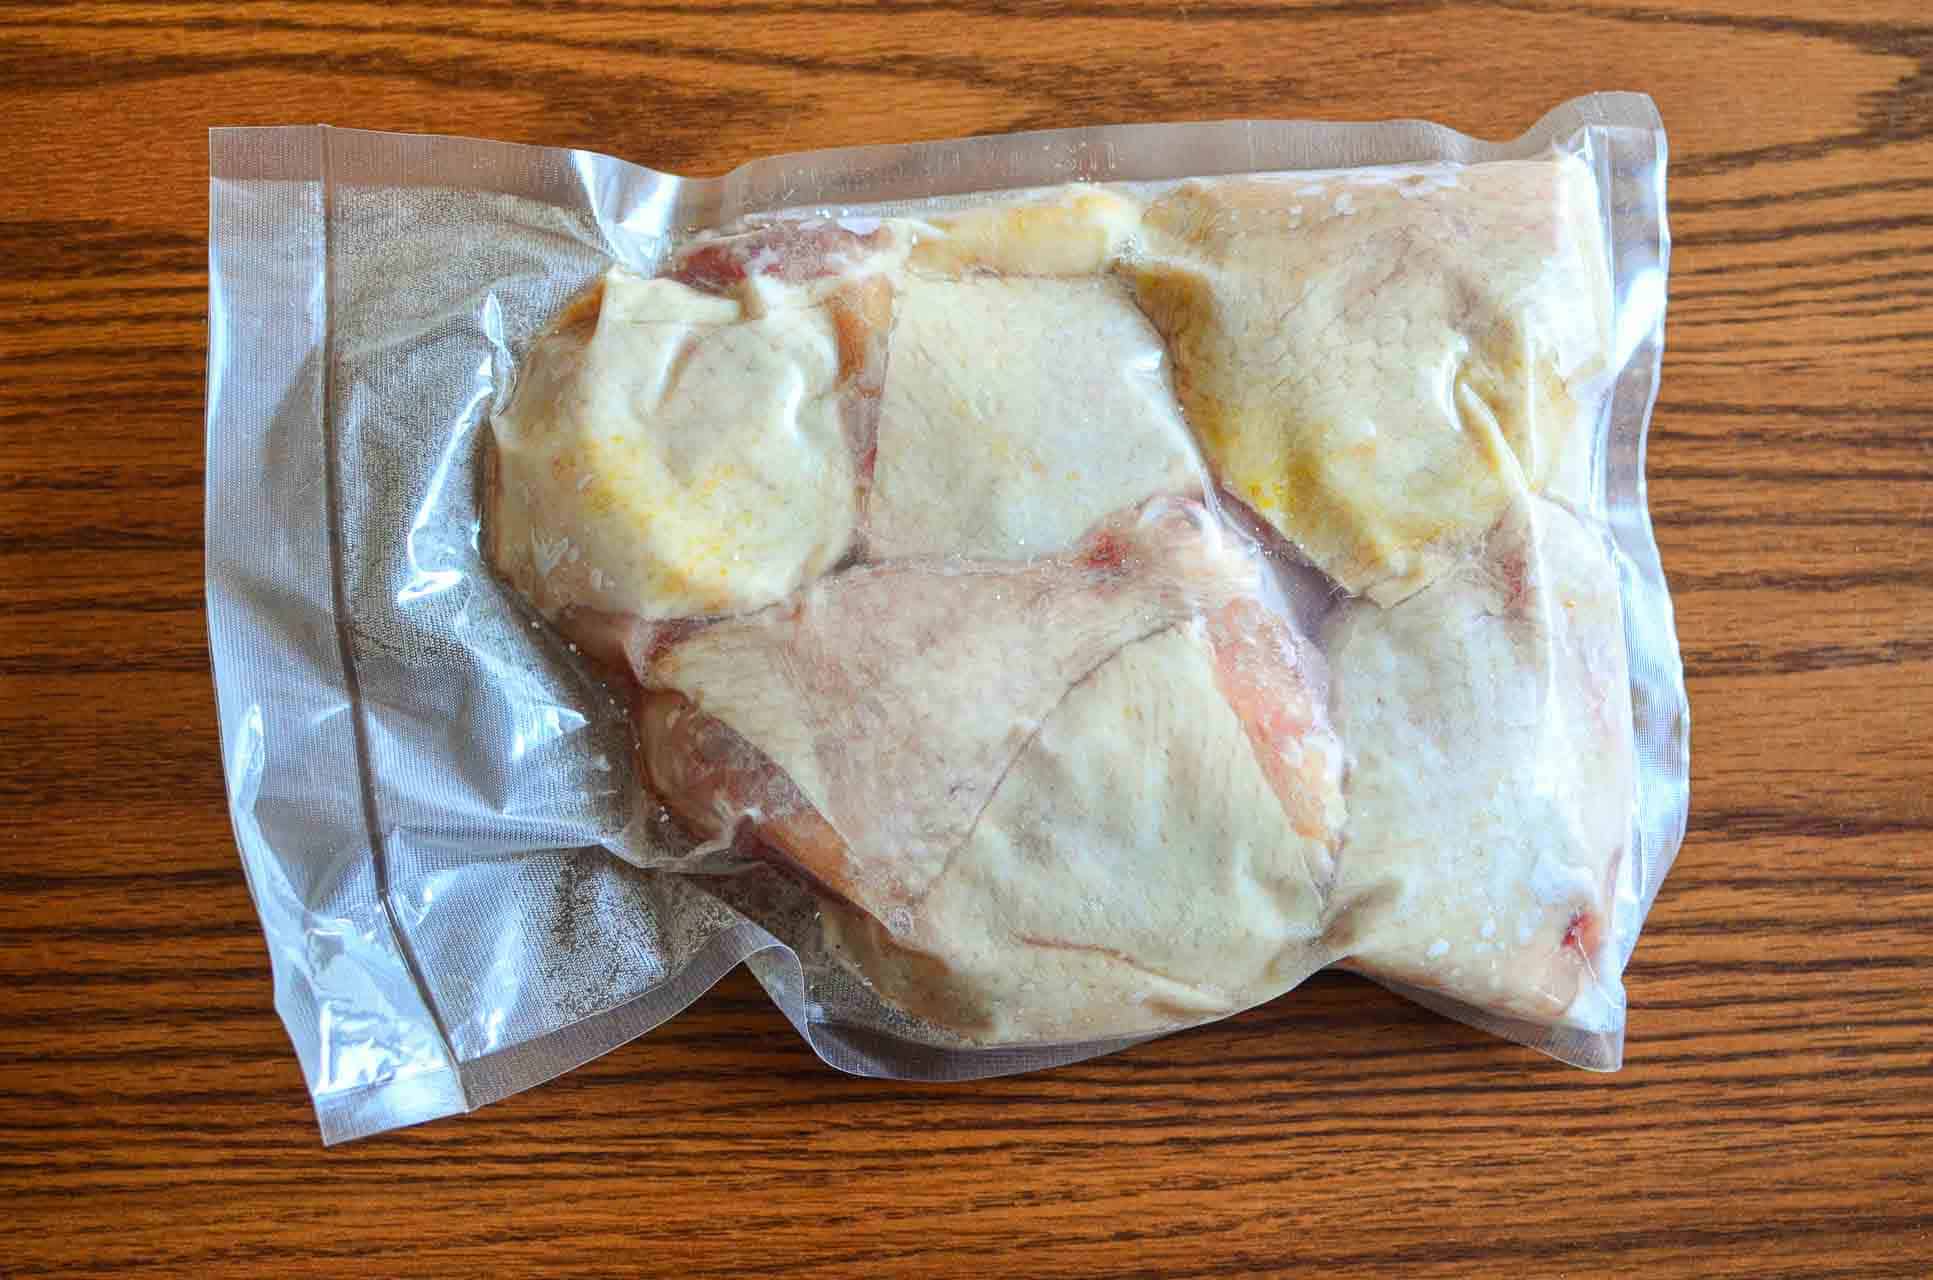 A vacuum sealed bag of chicken thighs